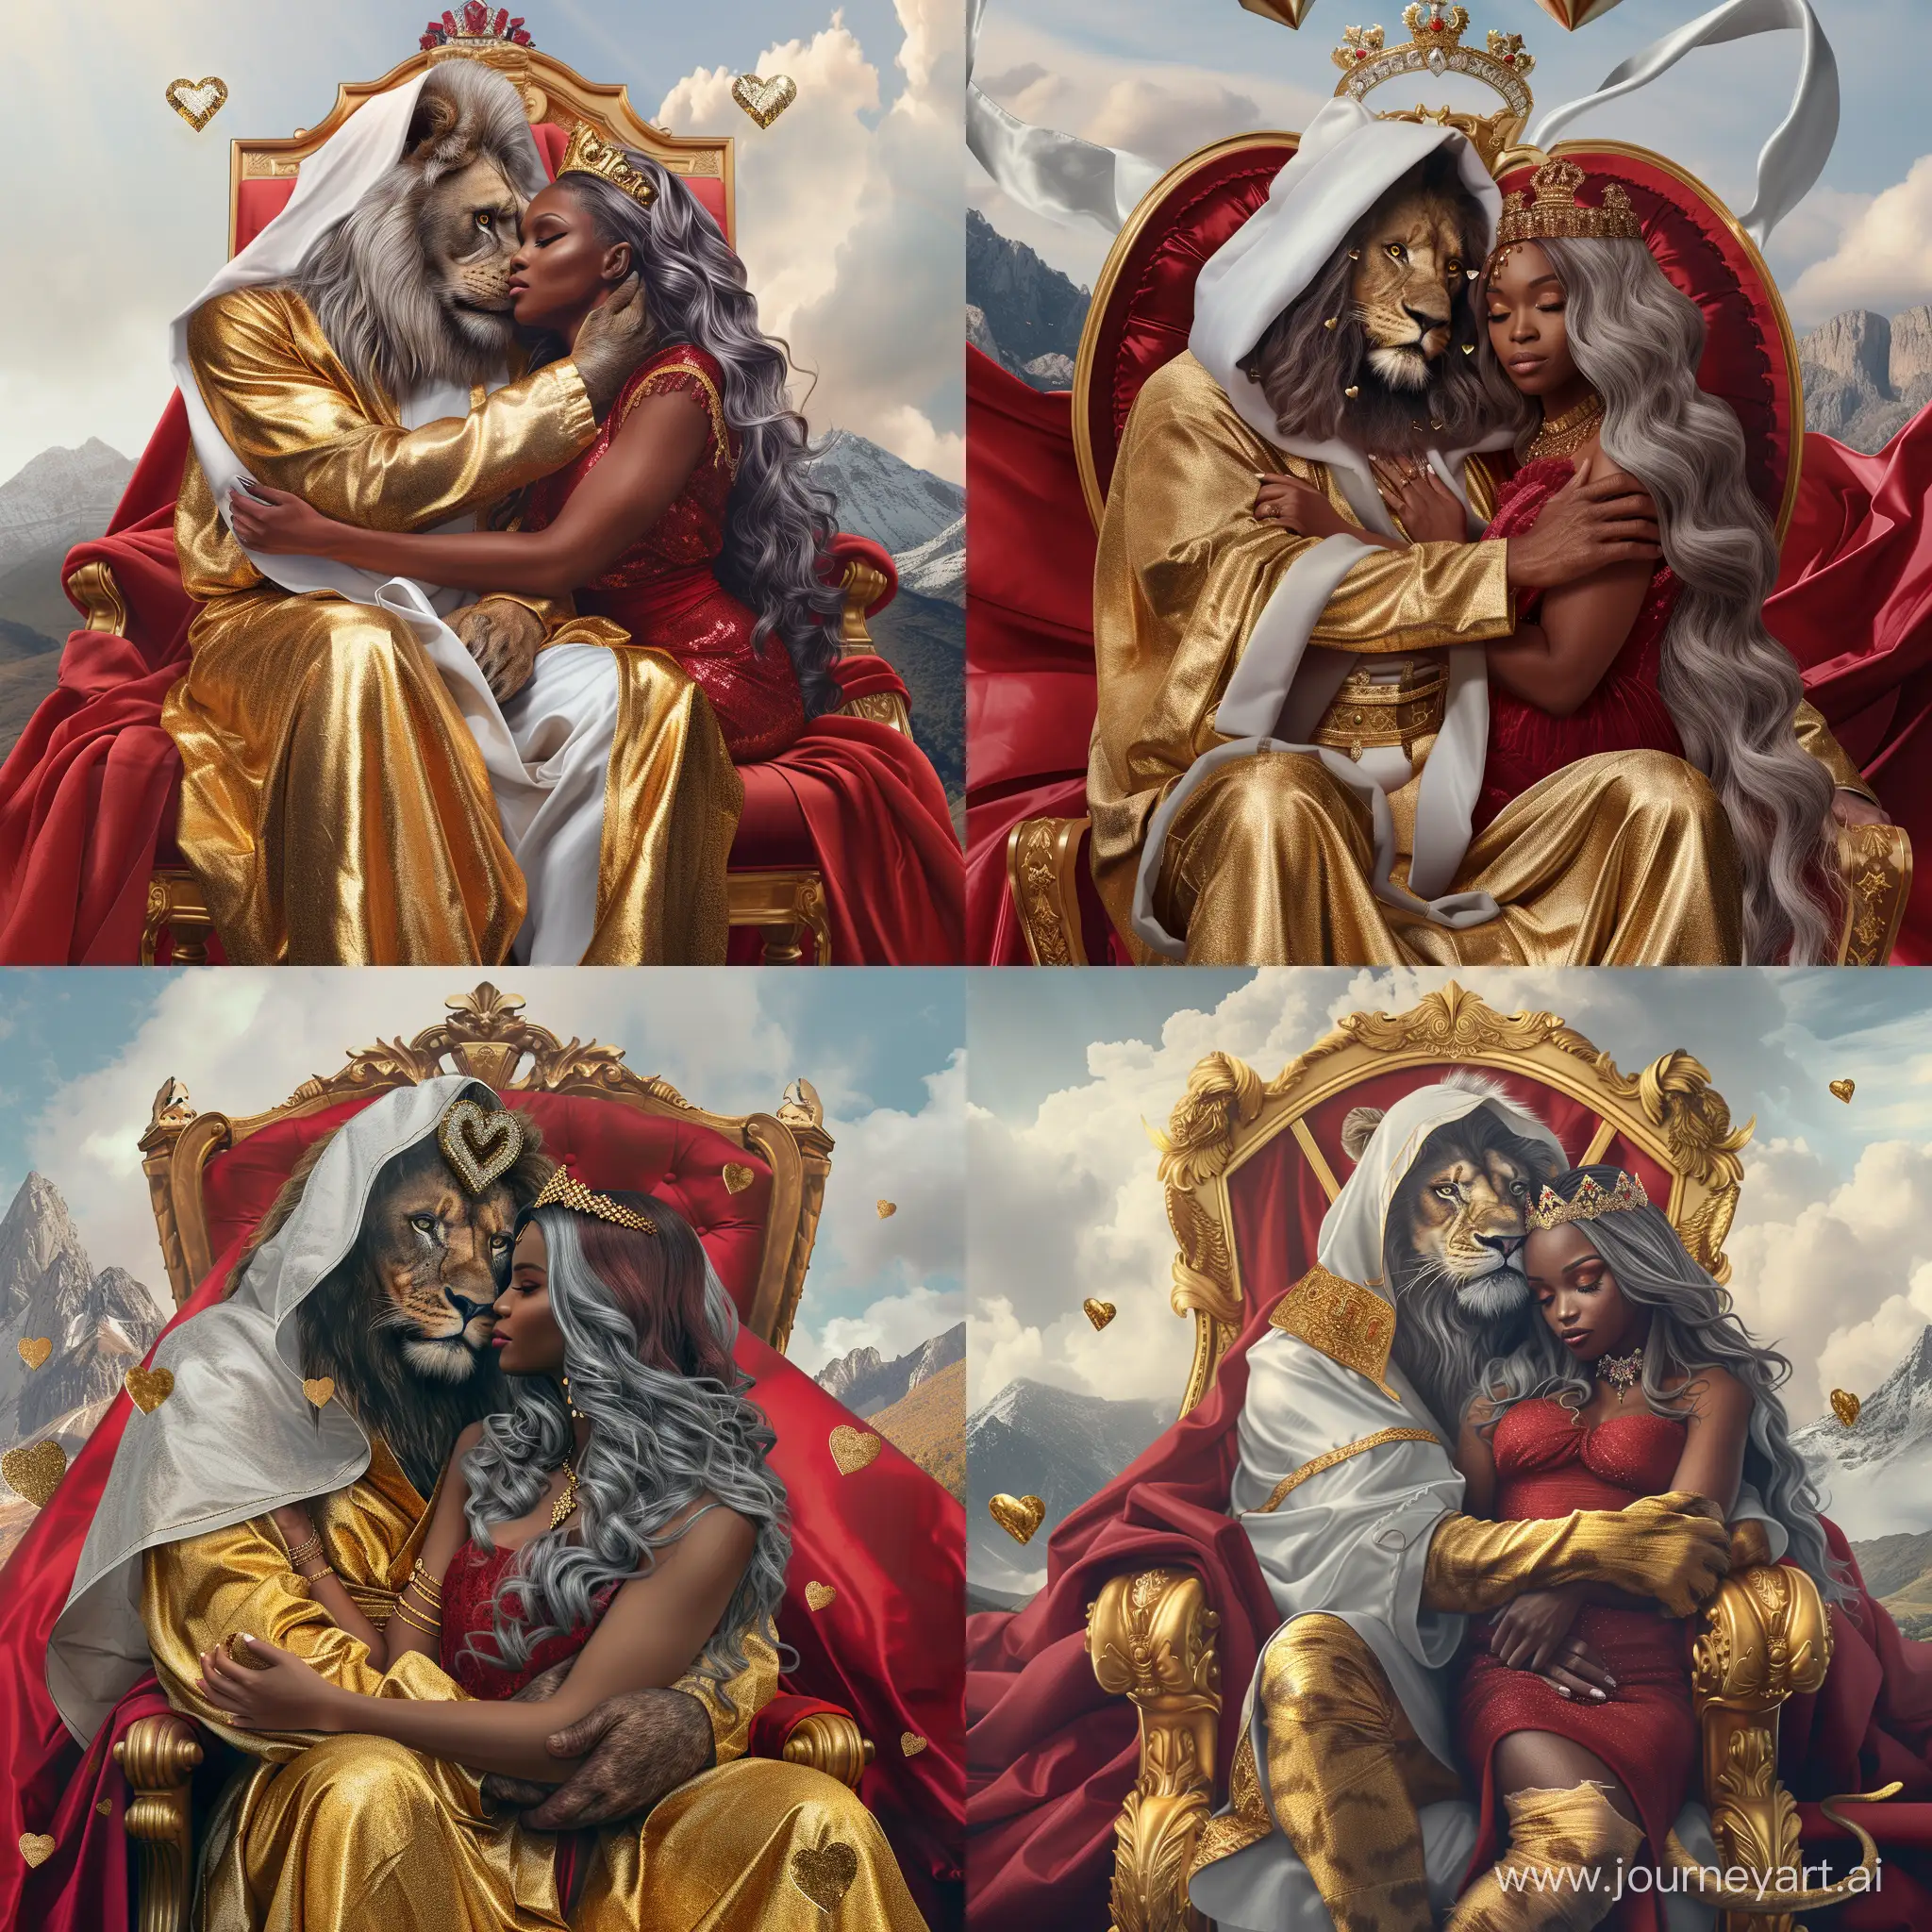 Double Exposure digital hearts, a high-definition illustration royal king lion wearing gold white hooded silky biblical full length radiance coat, sitting on large gold red fabric, gold frame royal throne, on his lap with her arms hugging behind neck is a beautiful realistic African American 50 years old woman extra long wavy grey burgundy hair with gold diamond head band, wearing elegant red royal dress, looking into each other eyes representing Valentine's Day love, hearts gold silver diamonds blend on mountain kingdom in sky background